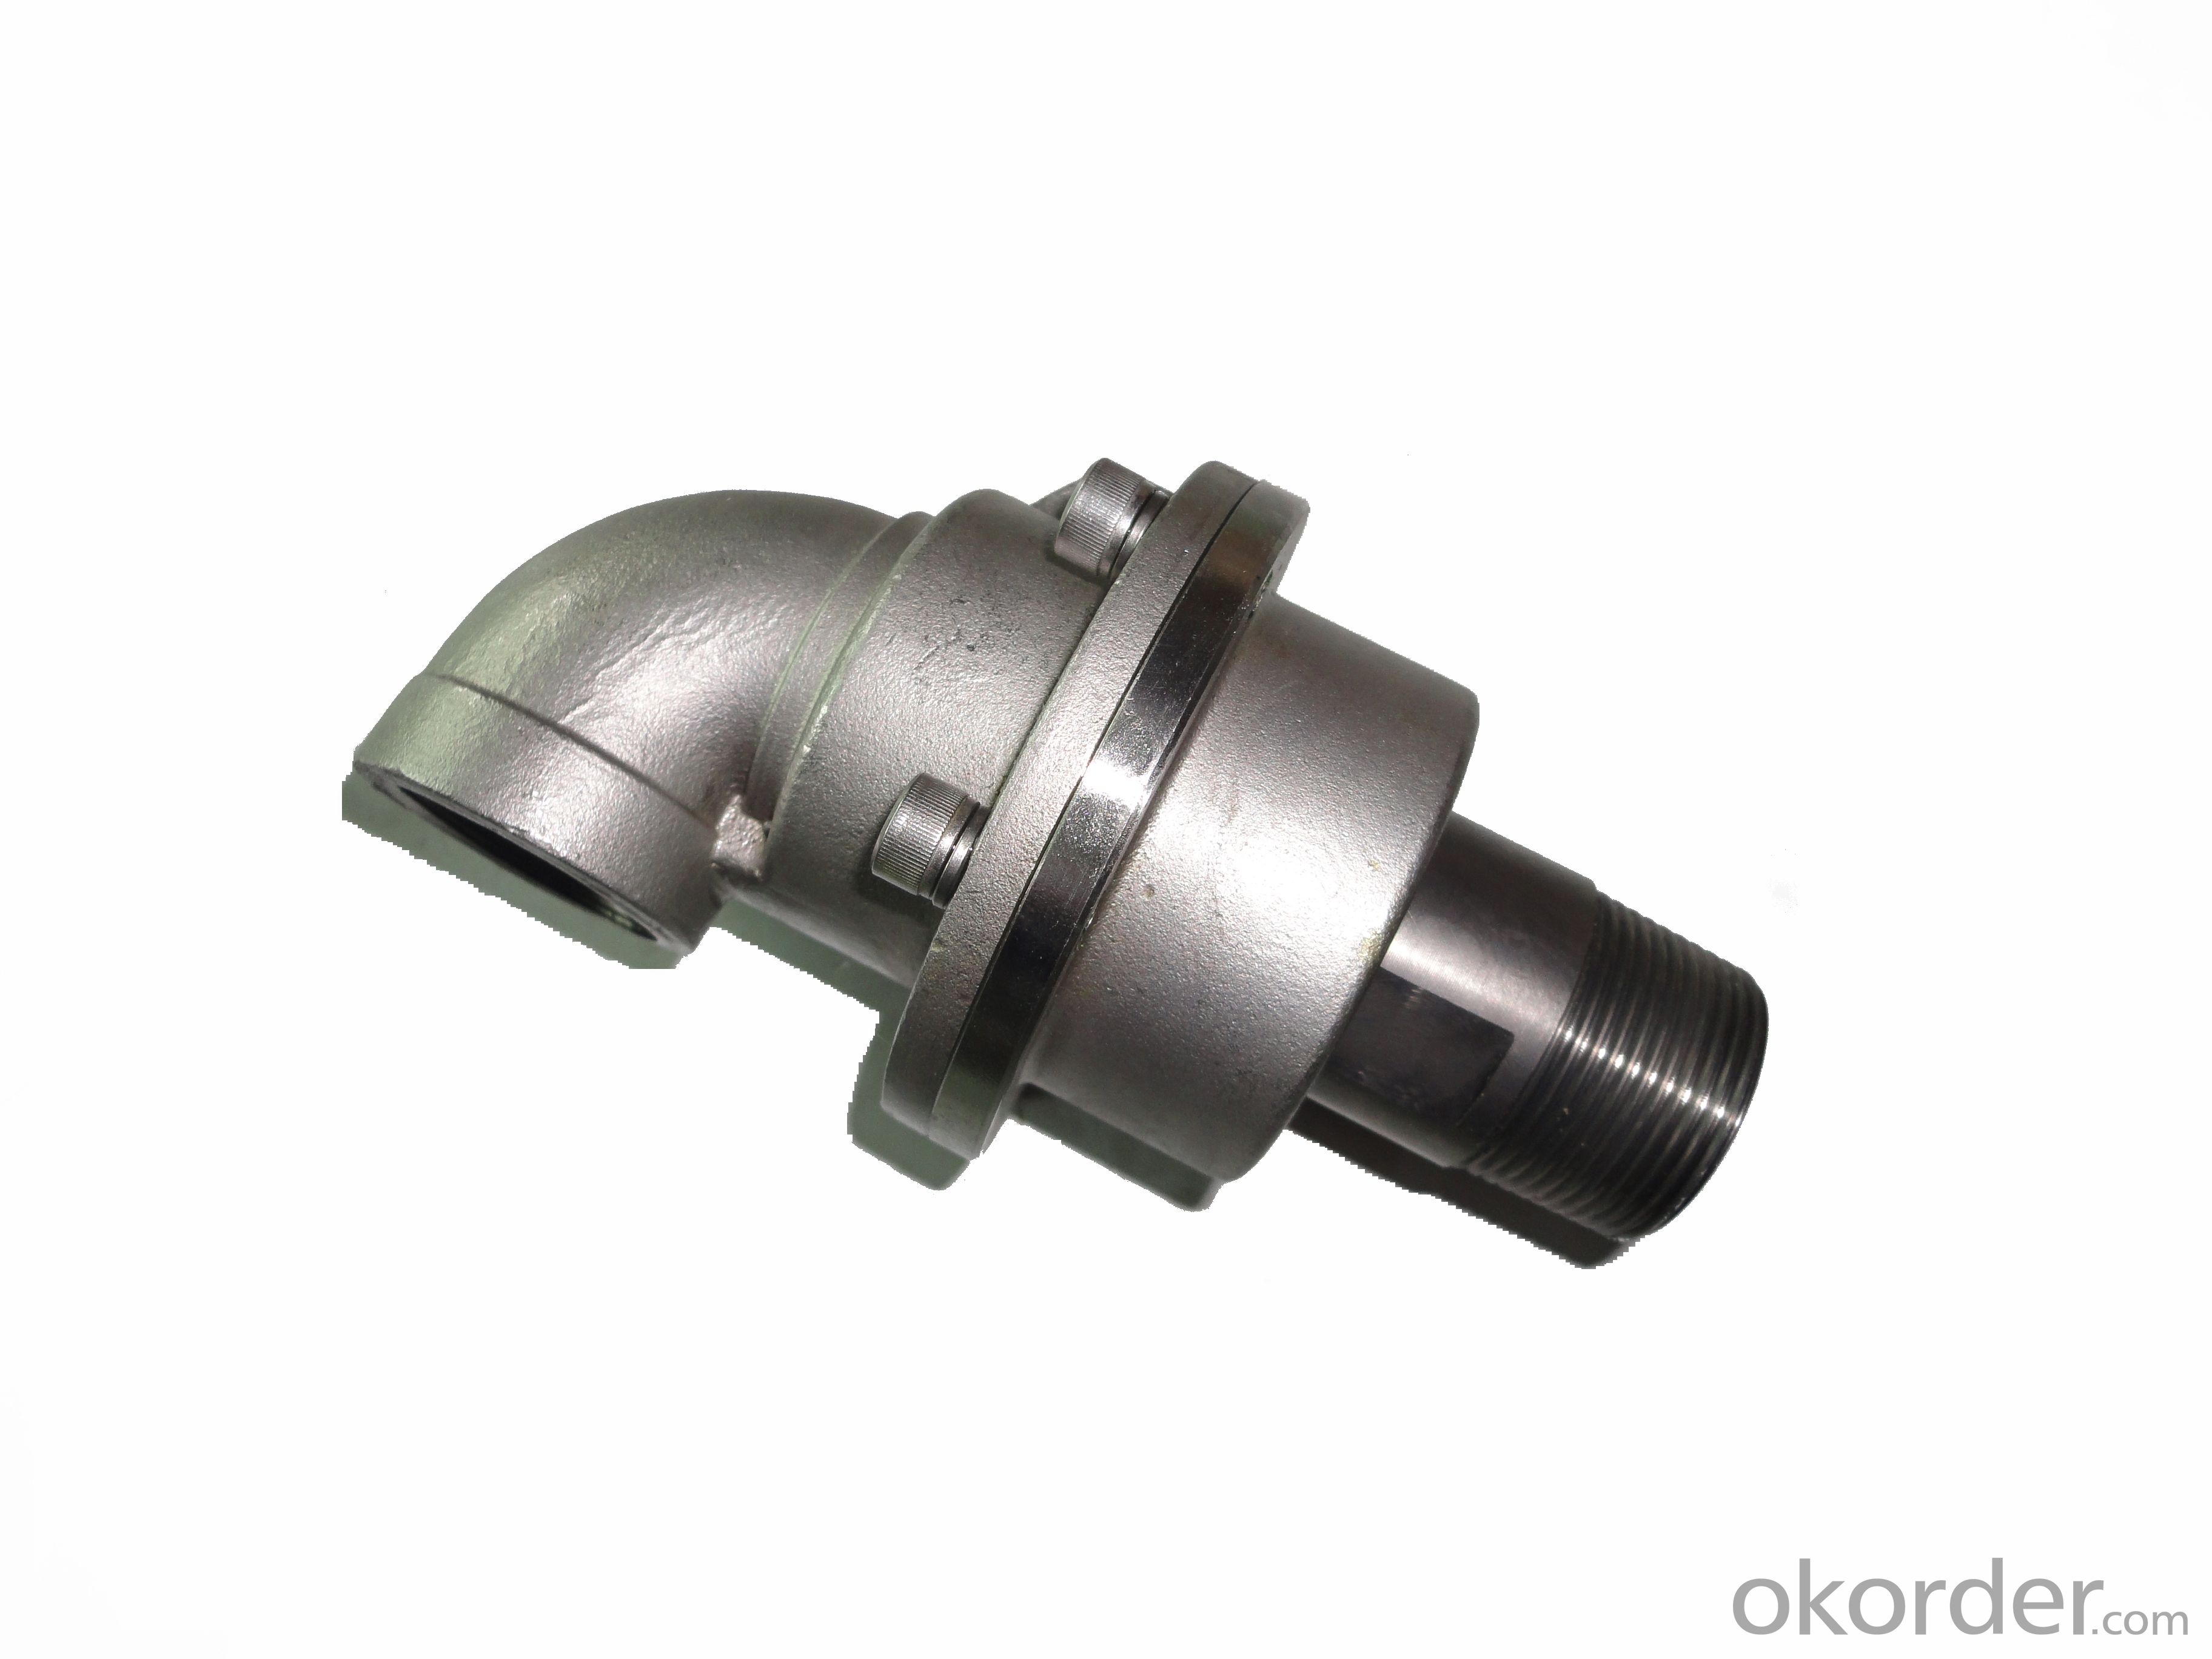 Hot Oil Steam rotation union,rotary joint